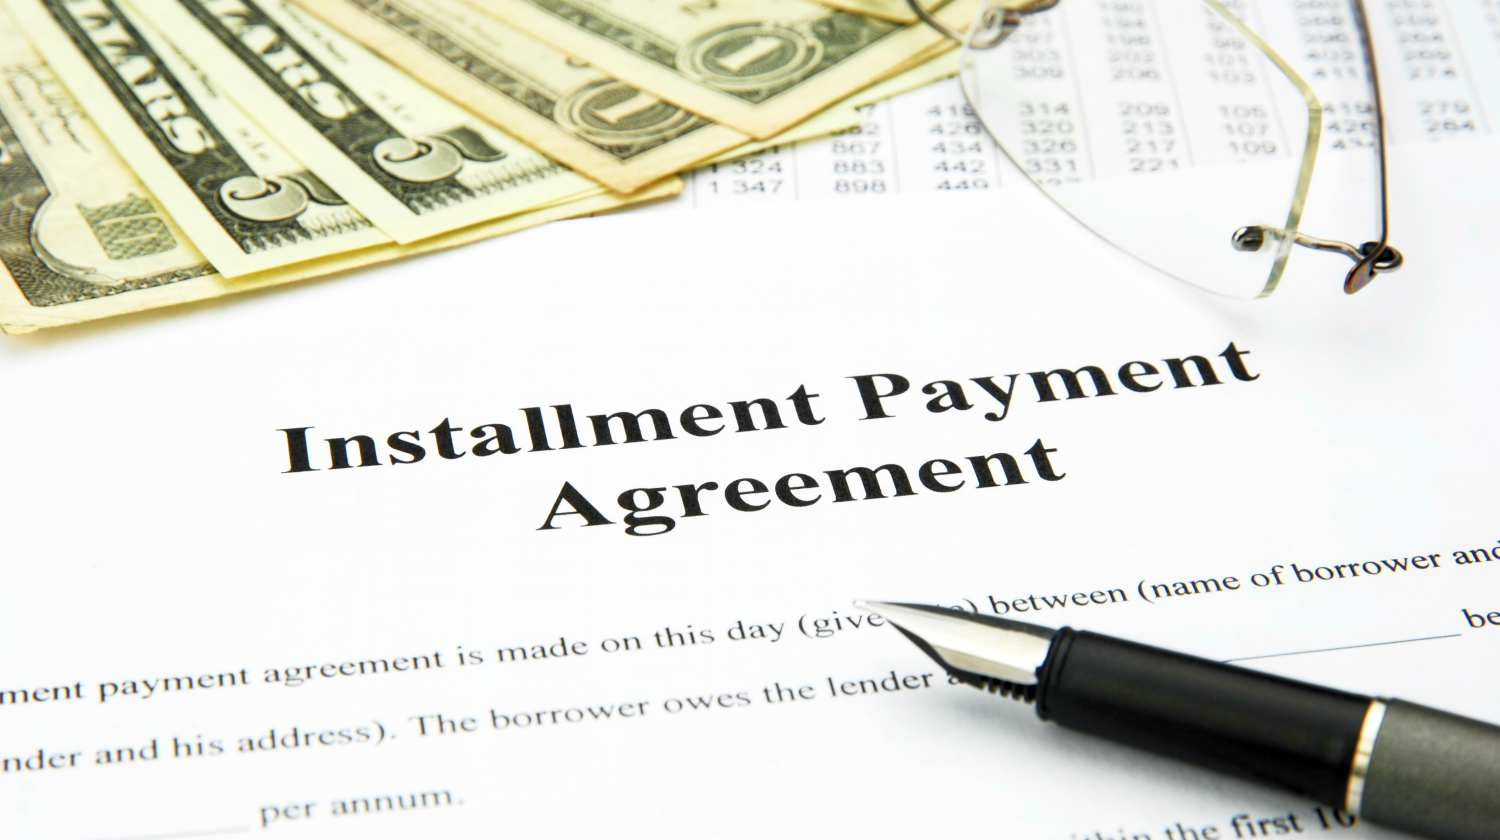 Irs Installment Agreement Online Irs Installment Agreement Types How Can It Help You